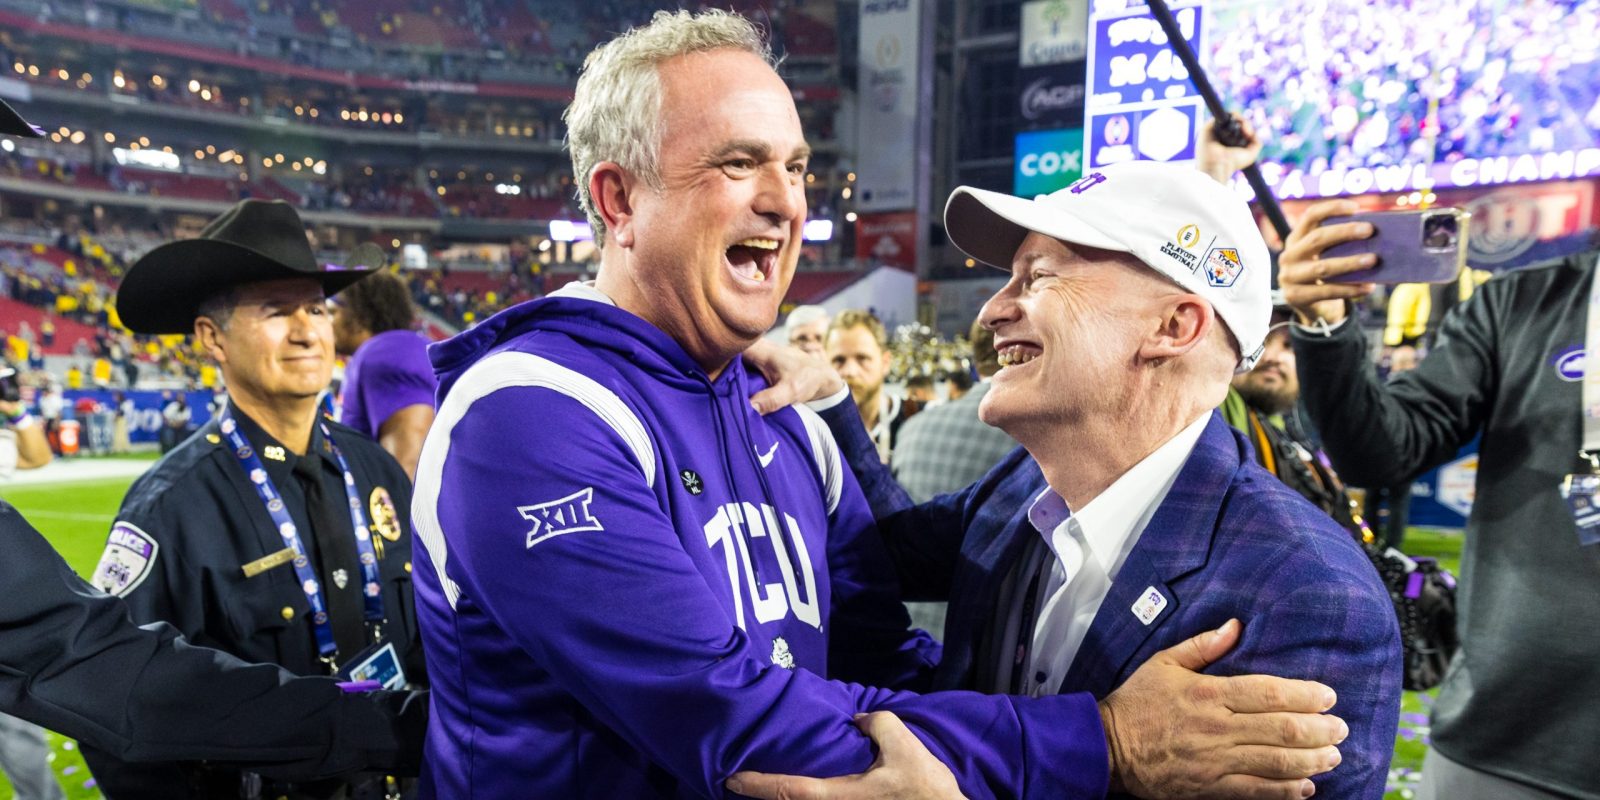 Sonny Dykes and TCU Chancellor Victor J. Boschini, Jr. celebrate after TCU's playoff semifinal win over Michigan on Dec. 31, 2022. Photo by Amy Peterson